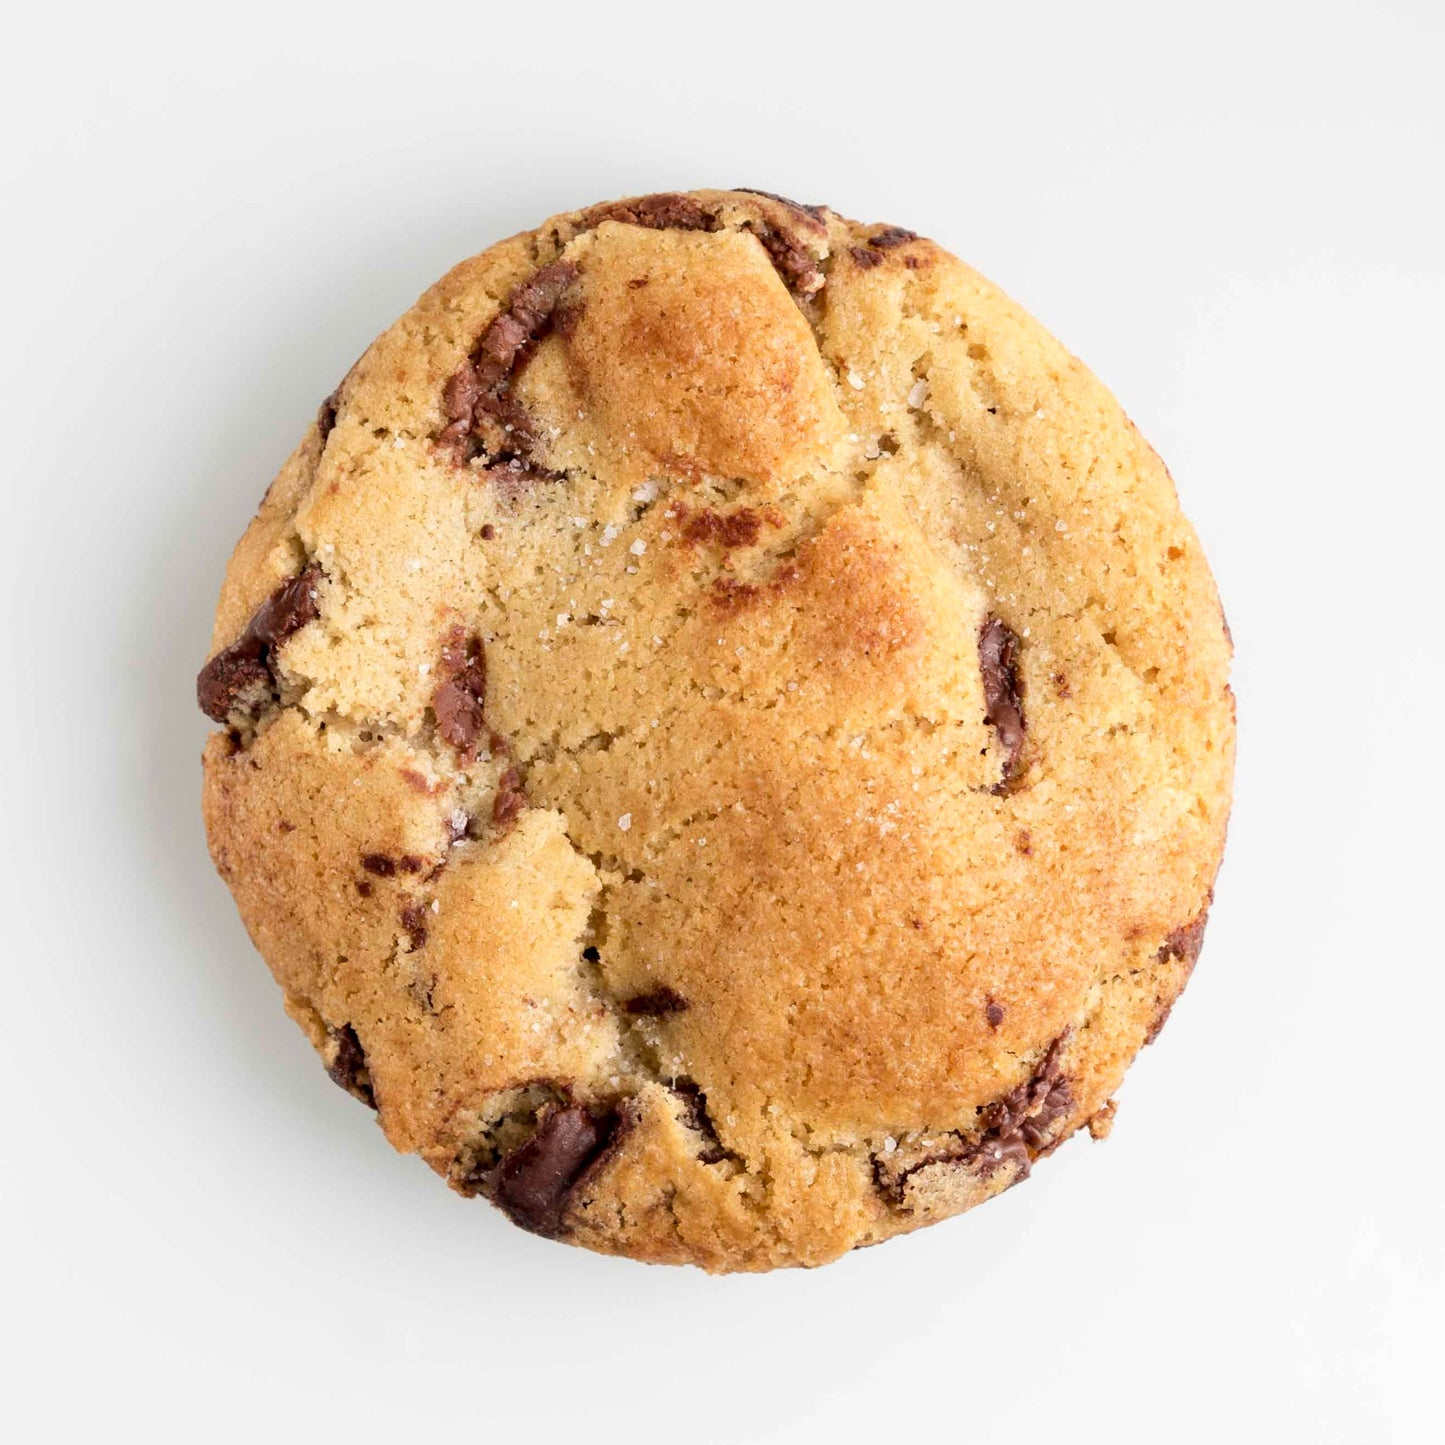 New York Double Chocolate Chip Cookies